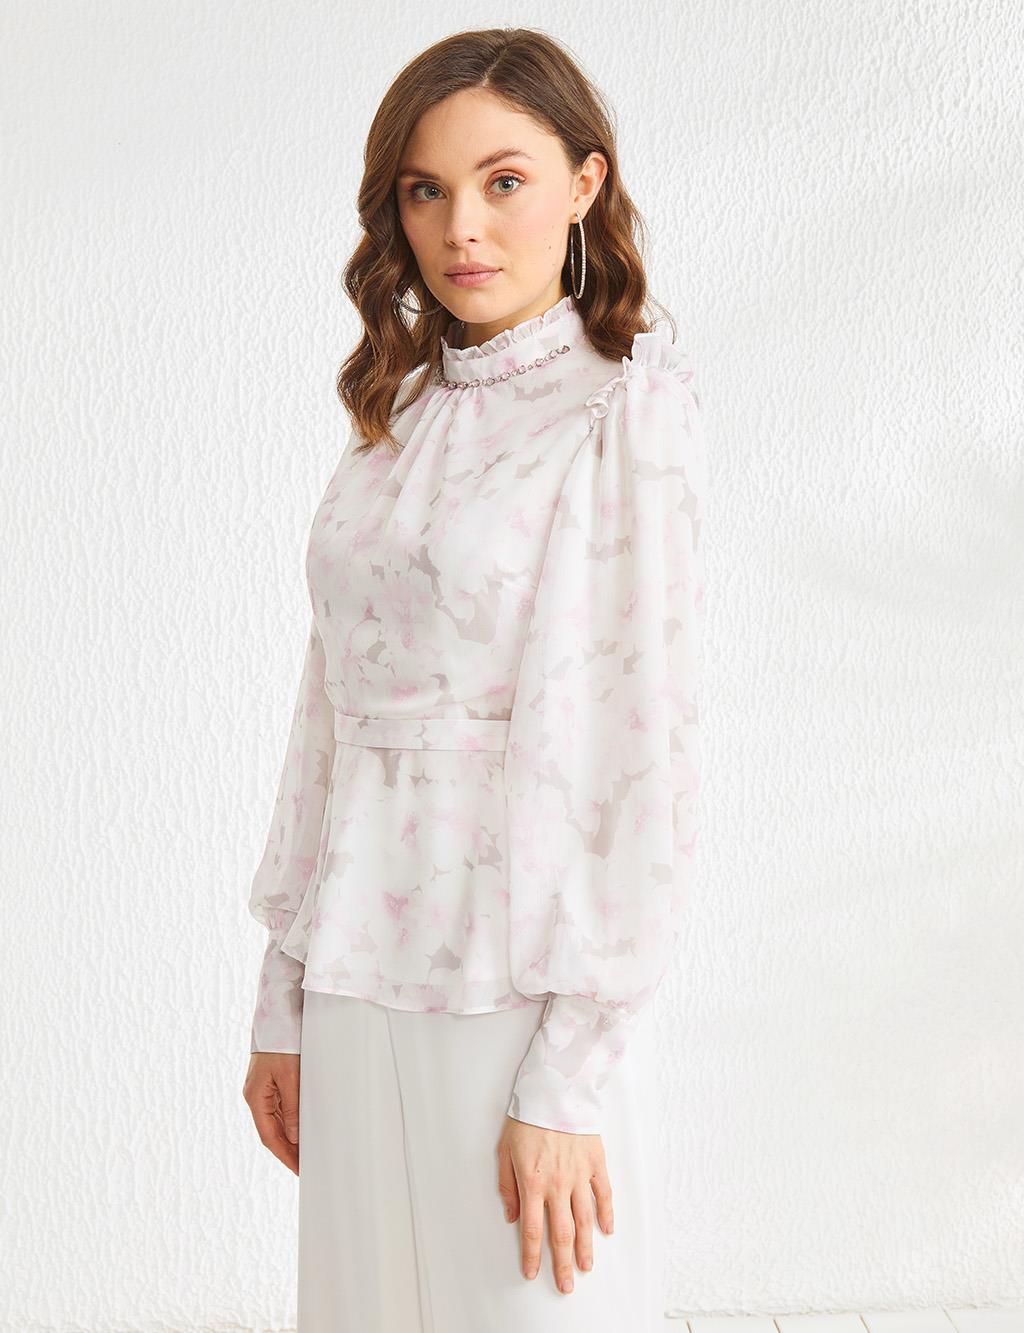 Floral Patterned Pleated Collar Blouse Powder